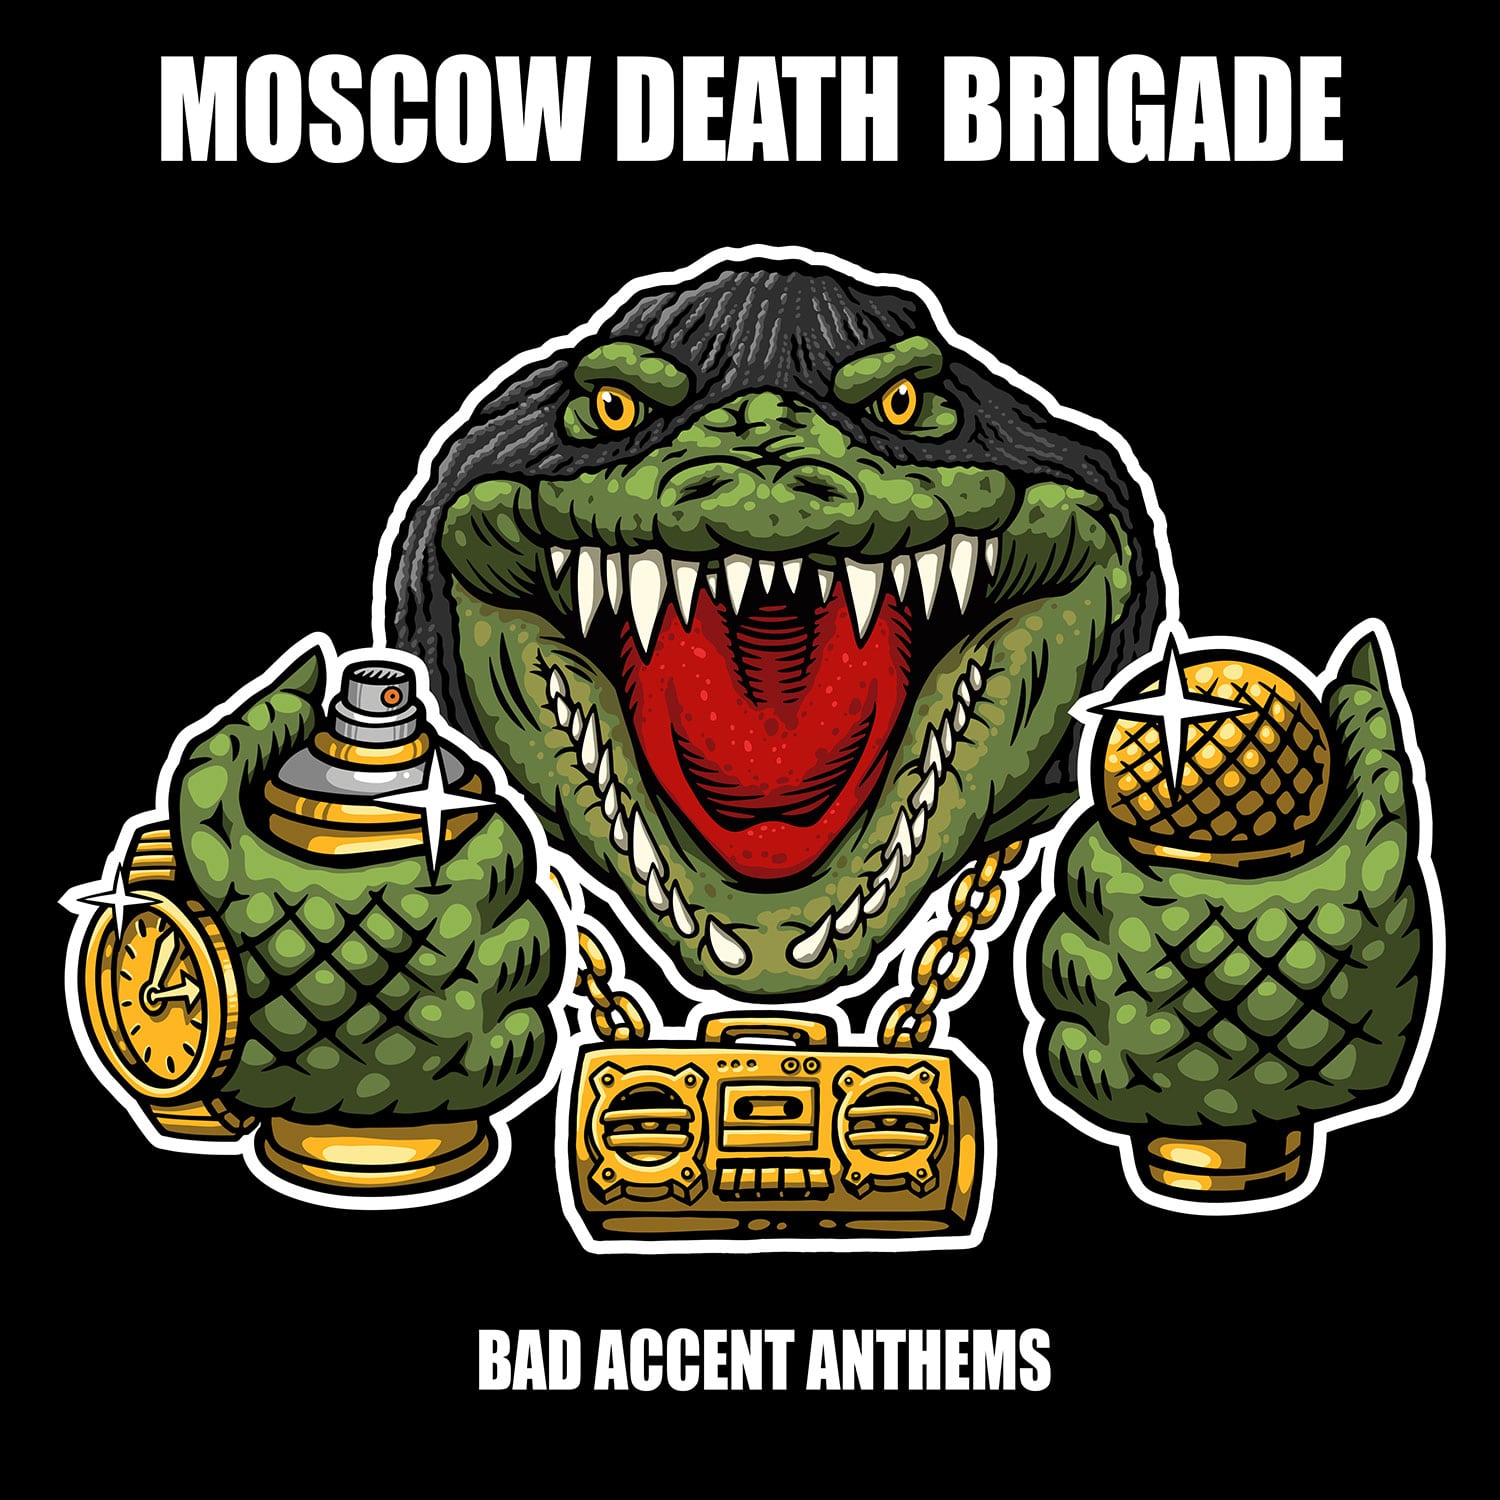 MOSCOW DEATH BRIGADE "Bad accent anthems" - 33T